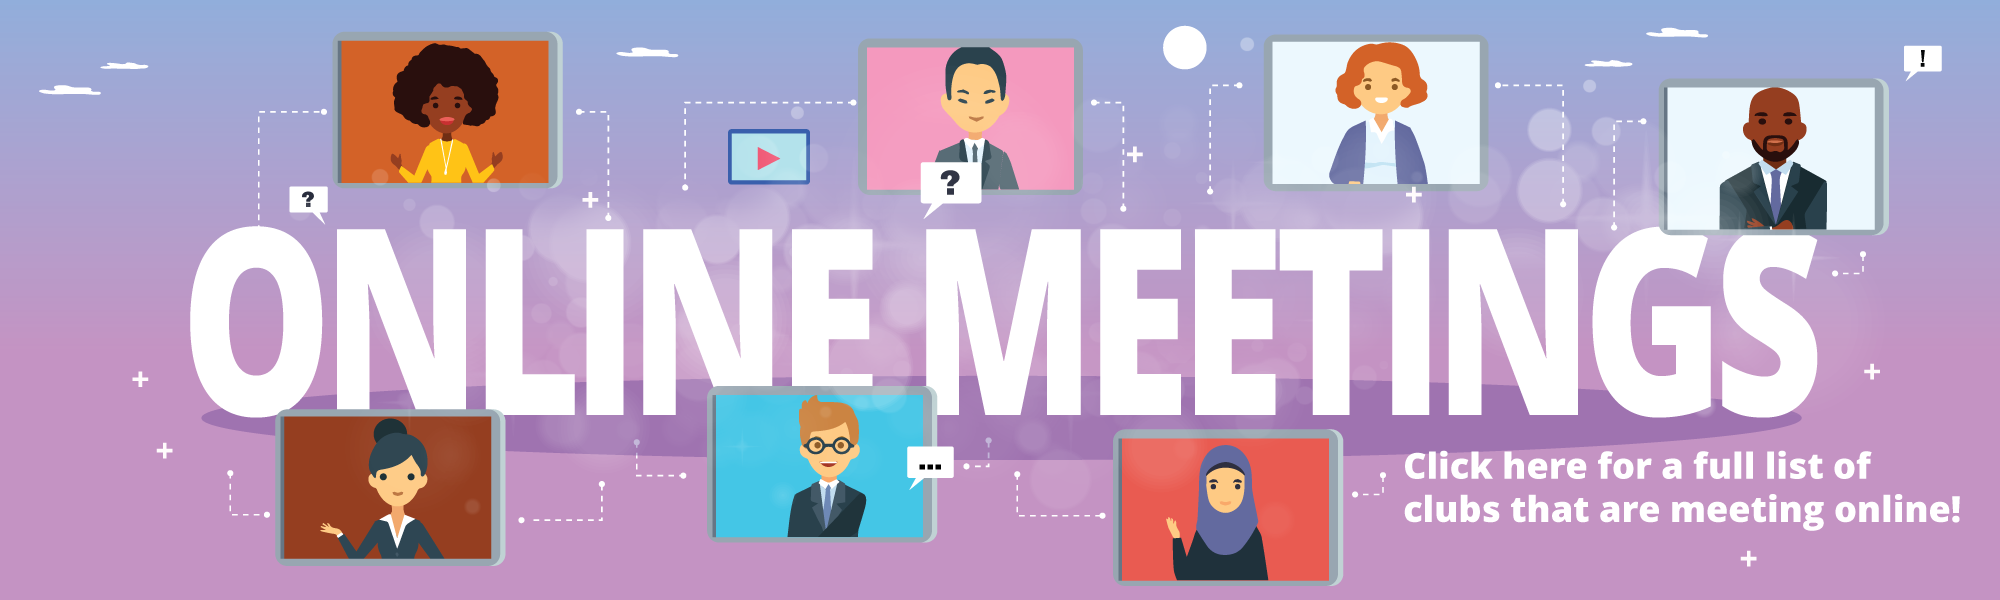 Images of people on a screen surrounding the words "Online Meetings" 